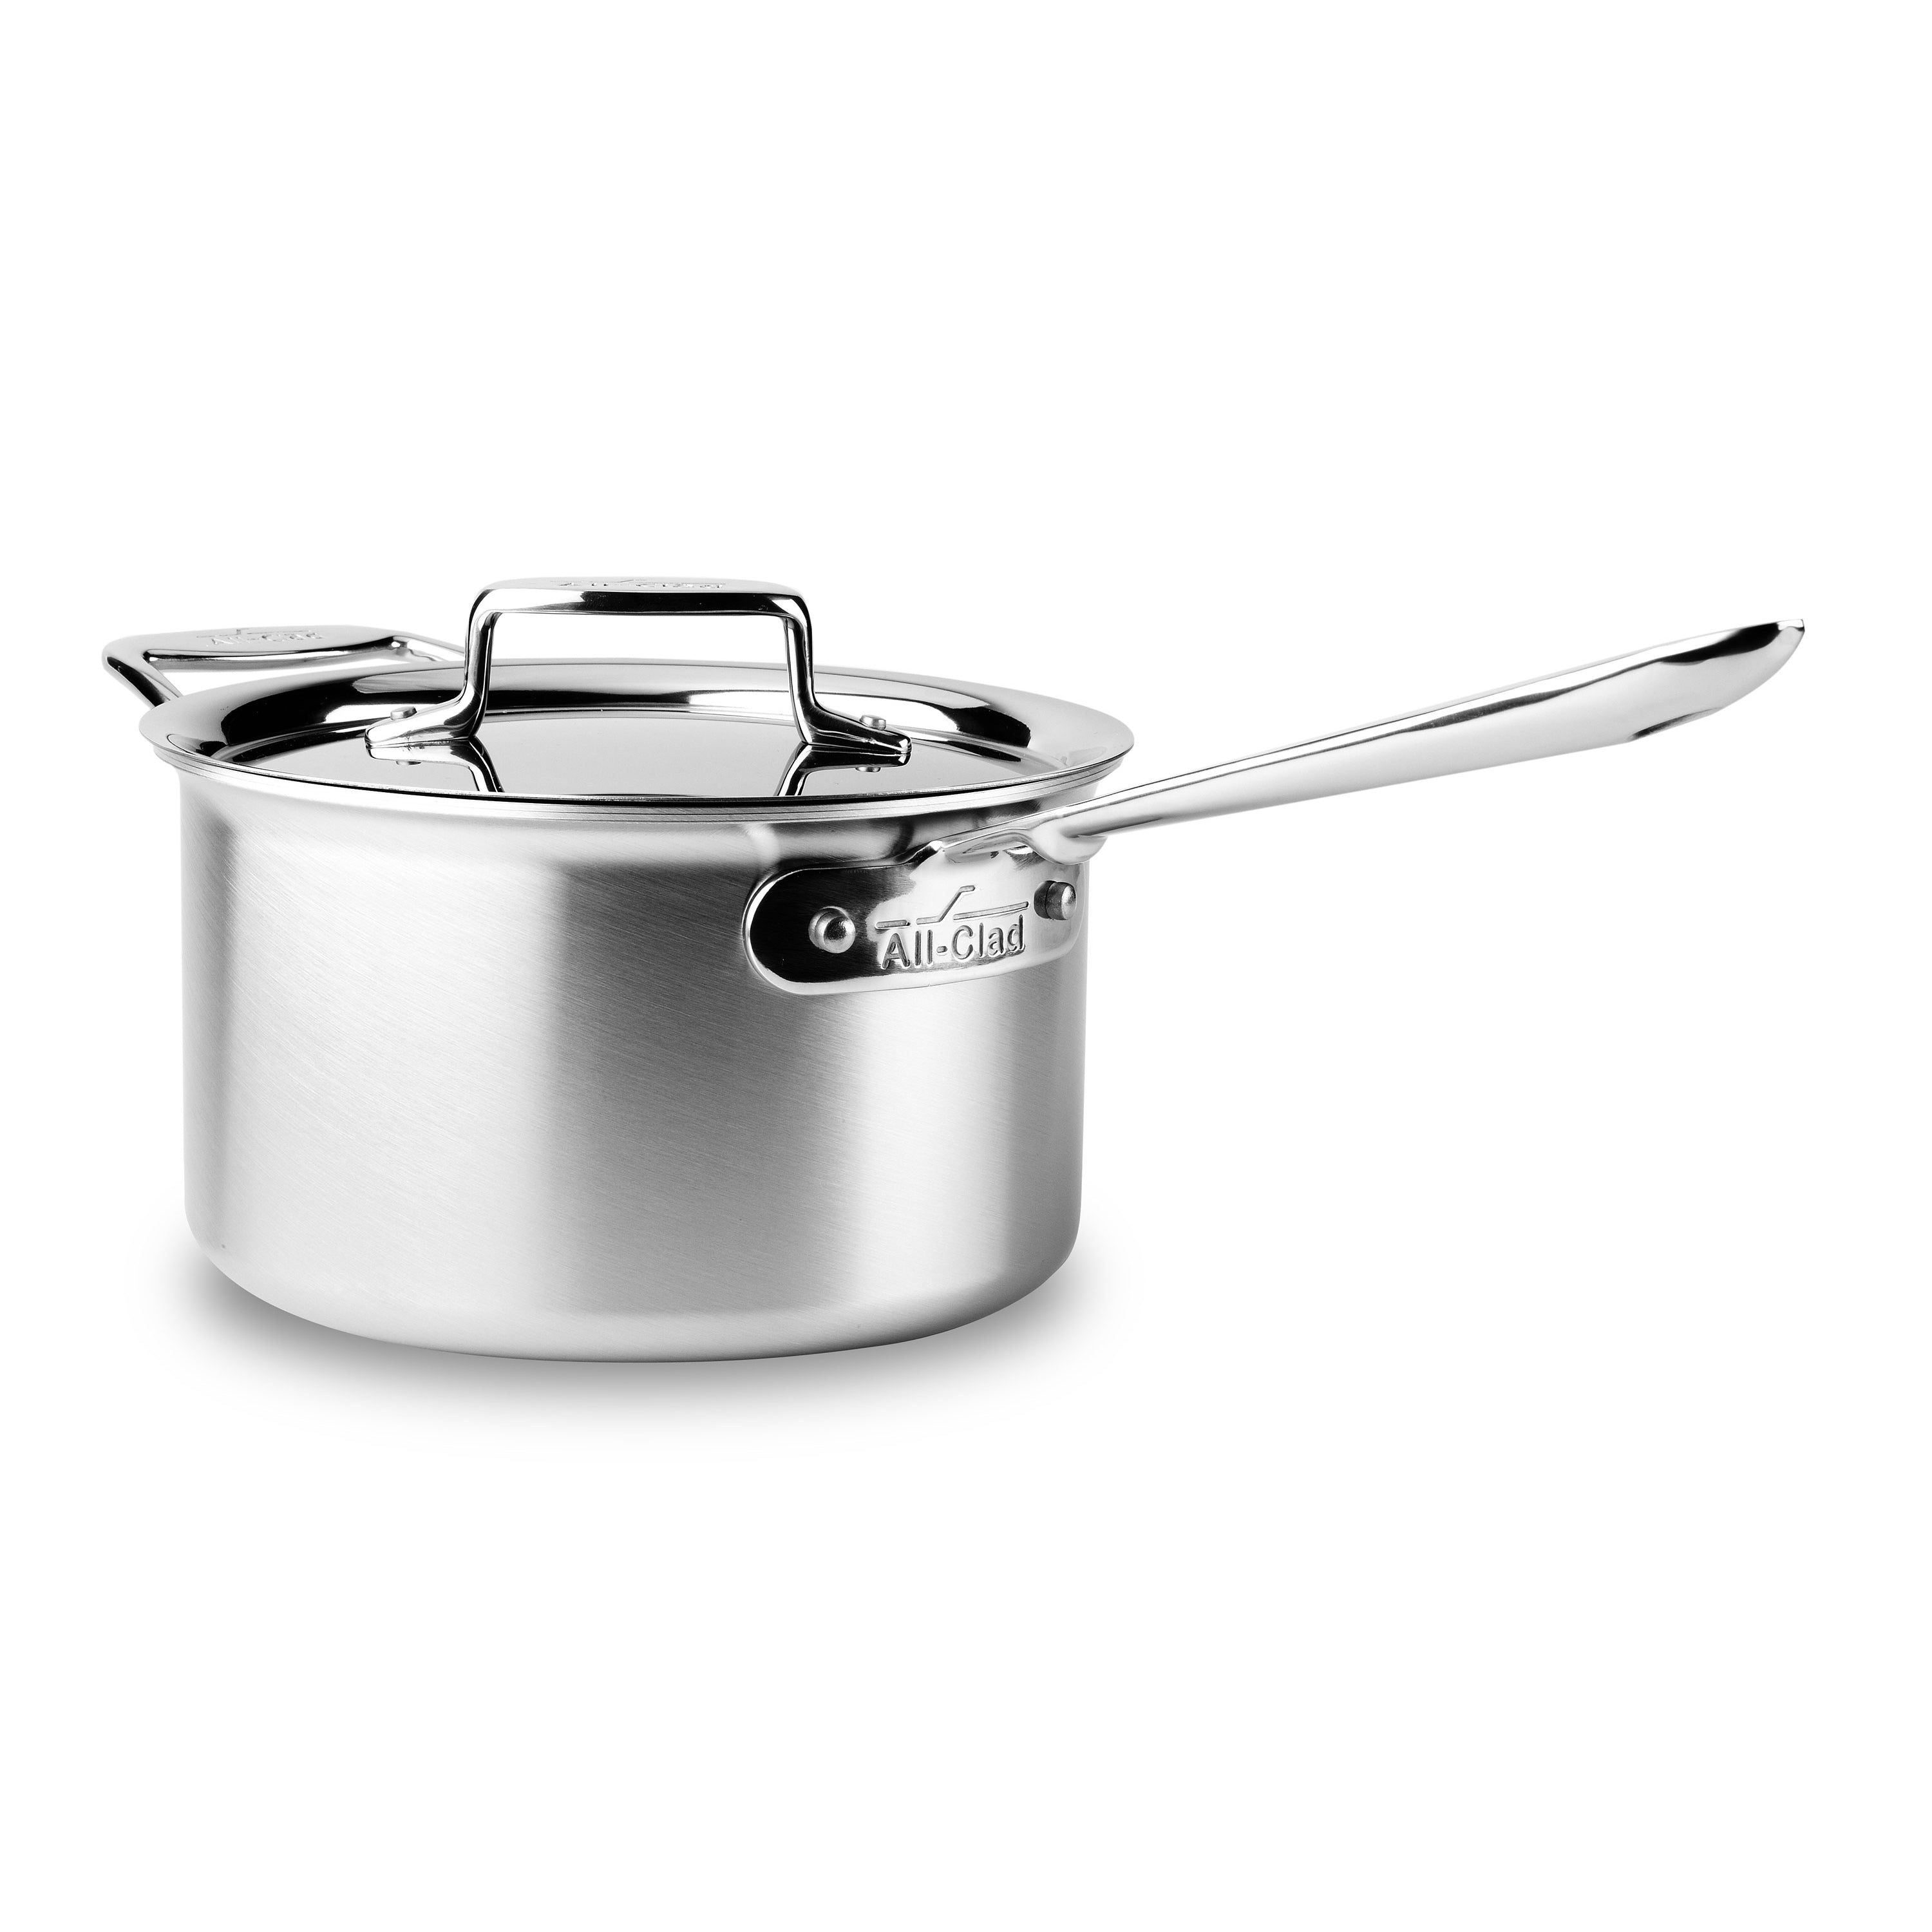 D5 Stainless Brushed 5-ply Bonded Cookware Set, 14 piece Set